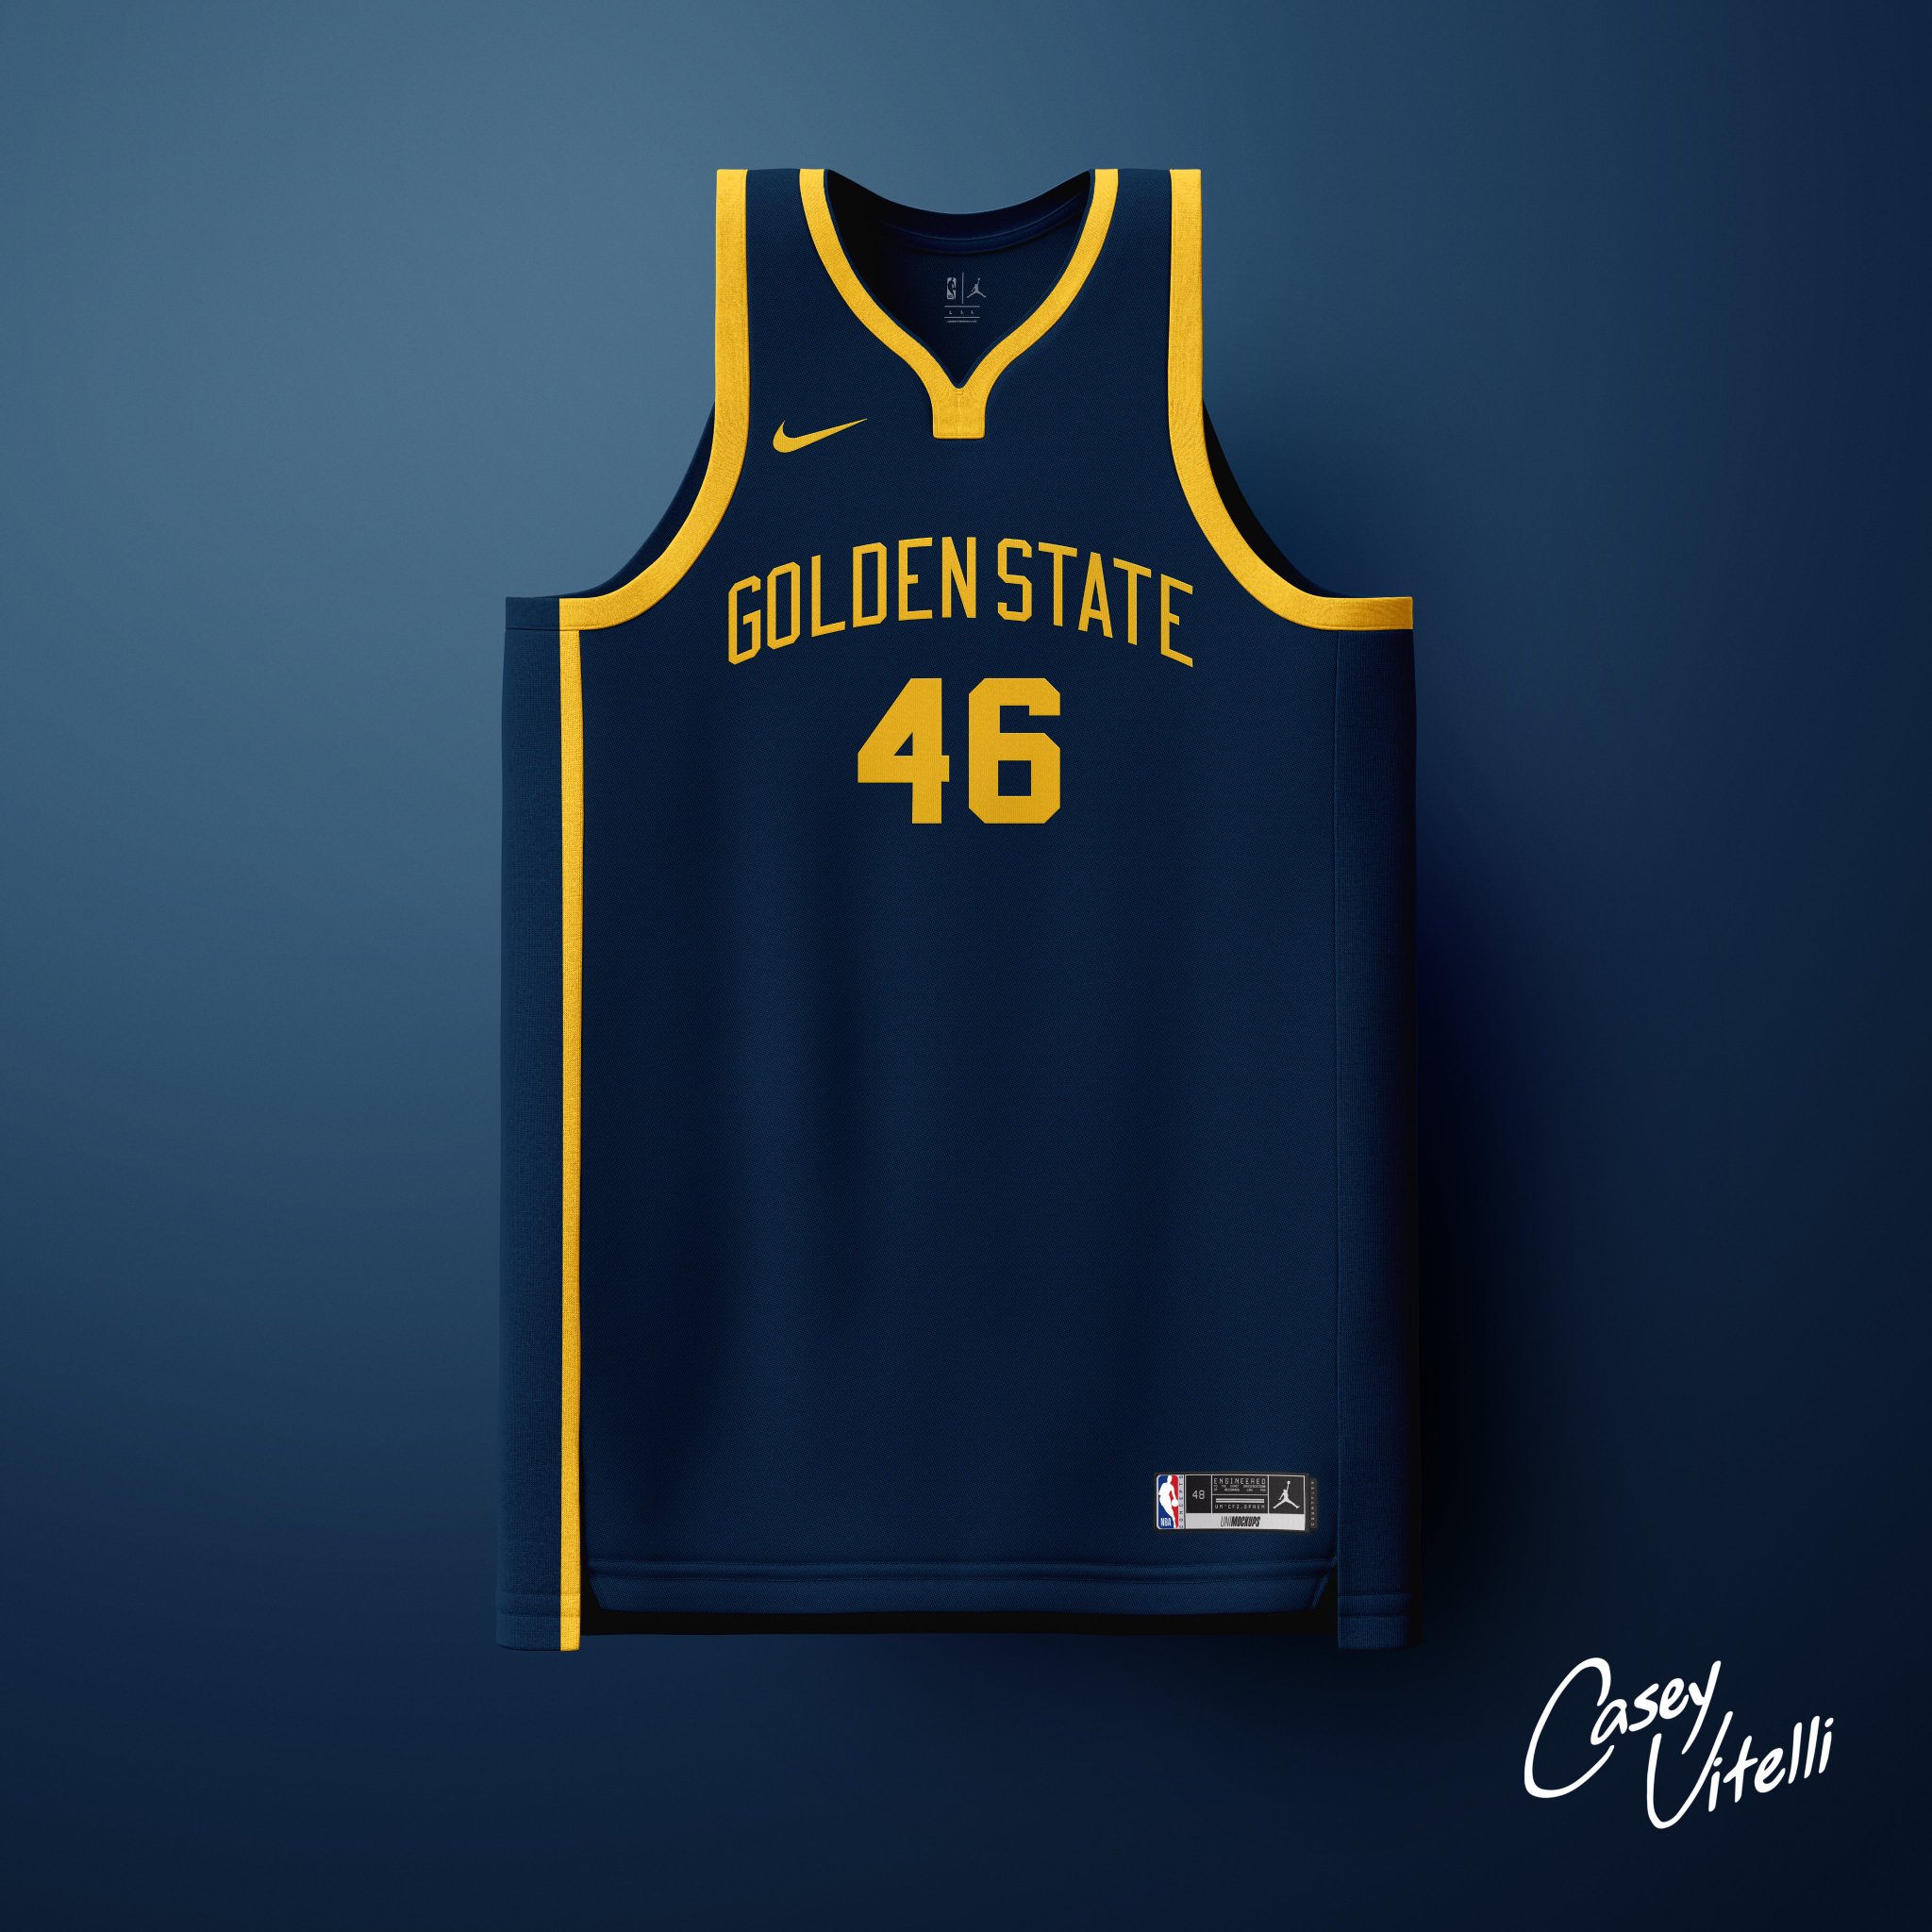 Version of the Pels “City Edition” jersey for next season from Casey  Vitelli on Twitter : r/NOLAPelicans